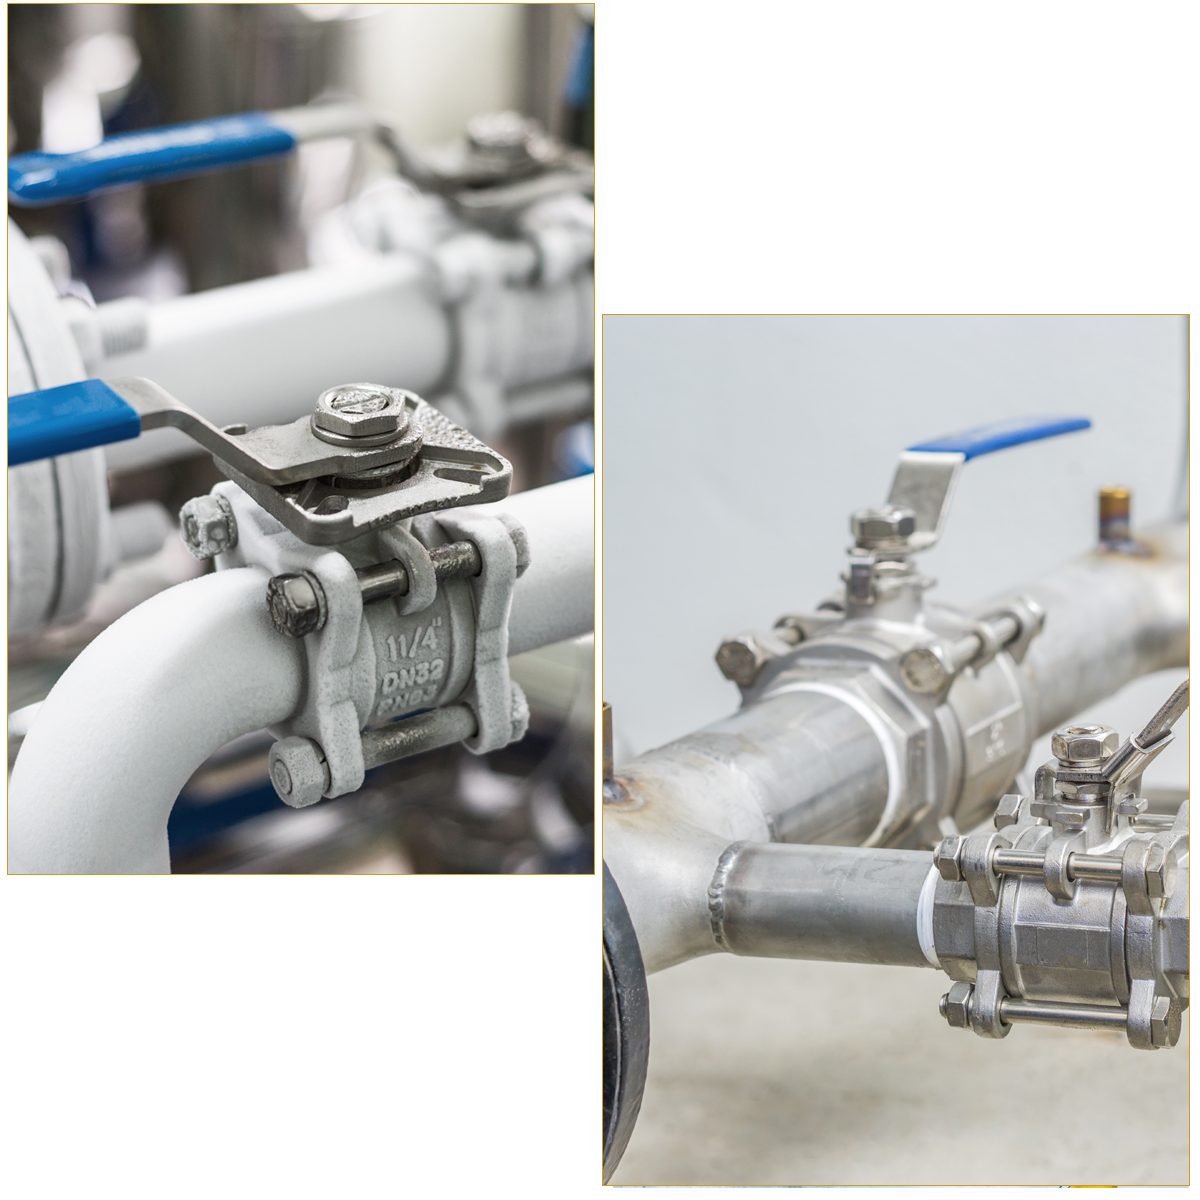 A collage image of industrial ball valves.
